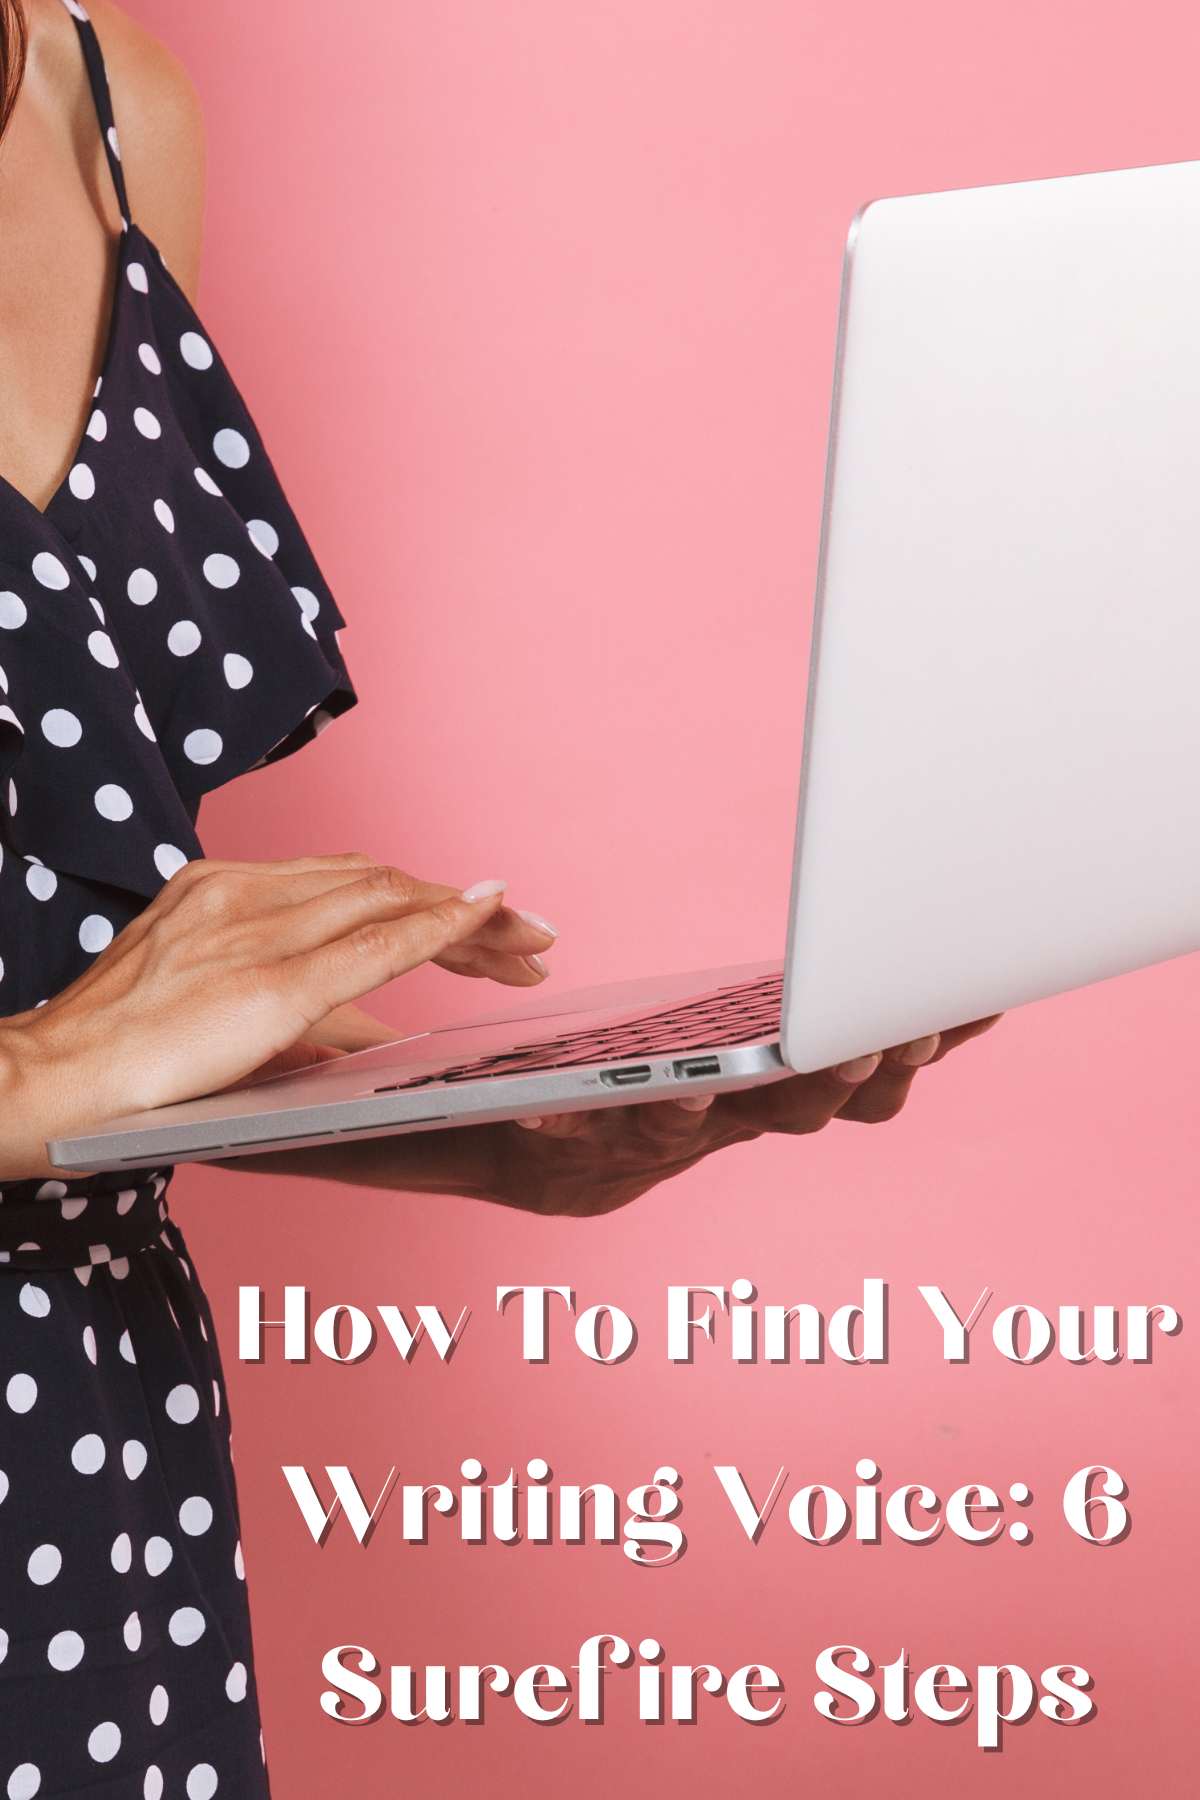 how to find your writing voice: 6 Surefire steps. Photo of woman holding laptop